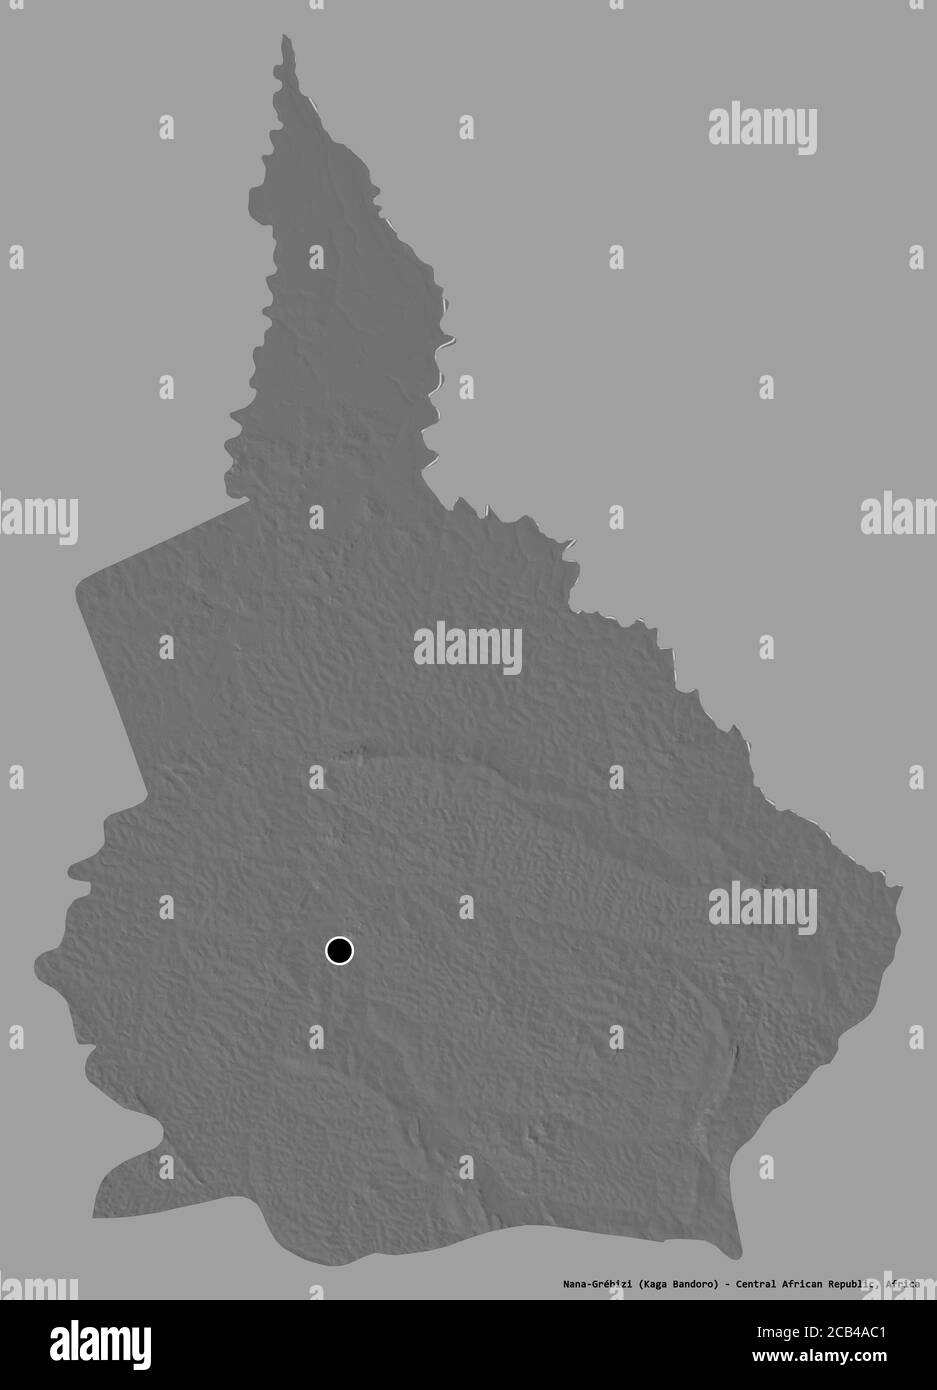 Shape of Nana-Grébizi, economic prefecture of Central African Republic, with its capital isolated on a solid color background. Bilevel elevation map. Stock Photo